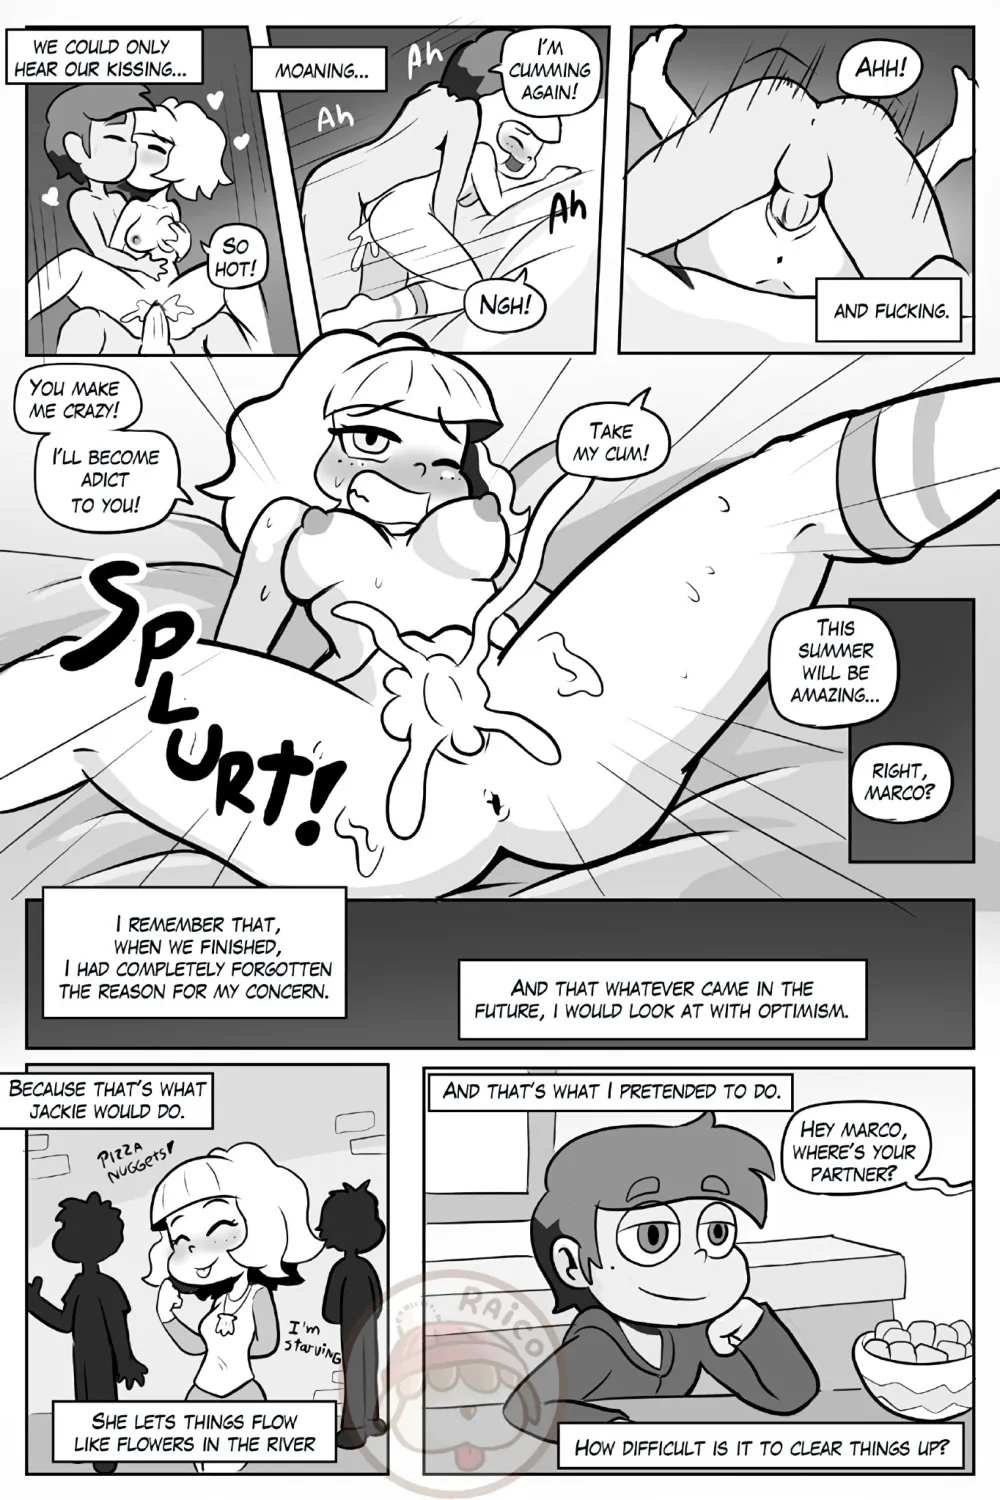 END OF YEAR PARTY - Page 9